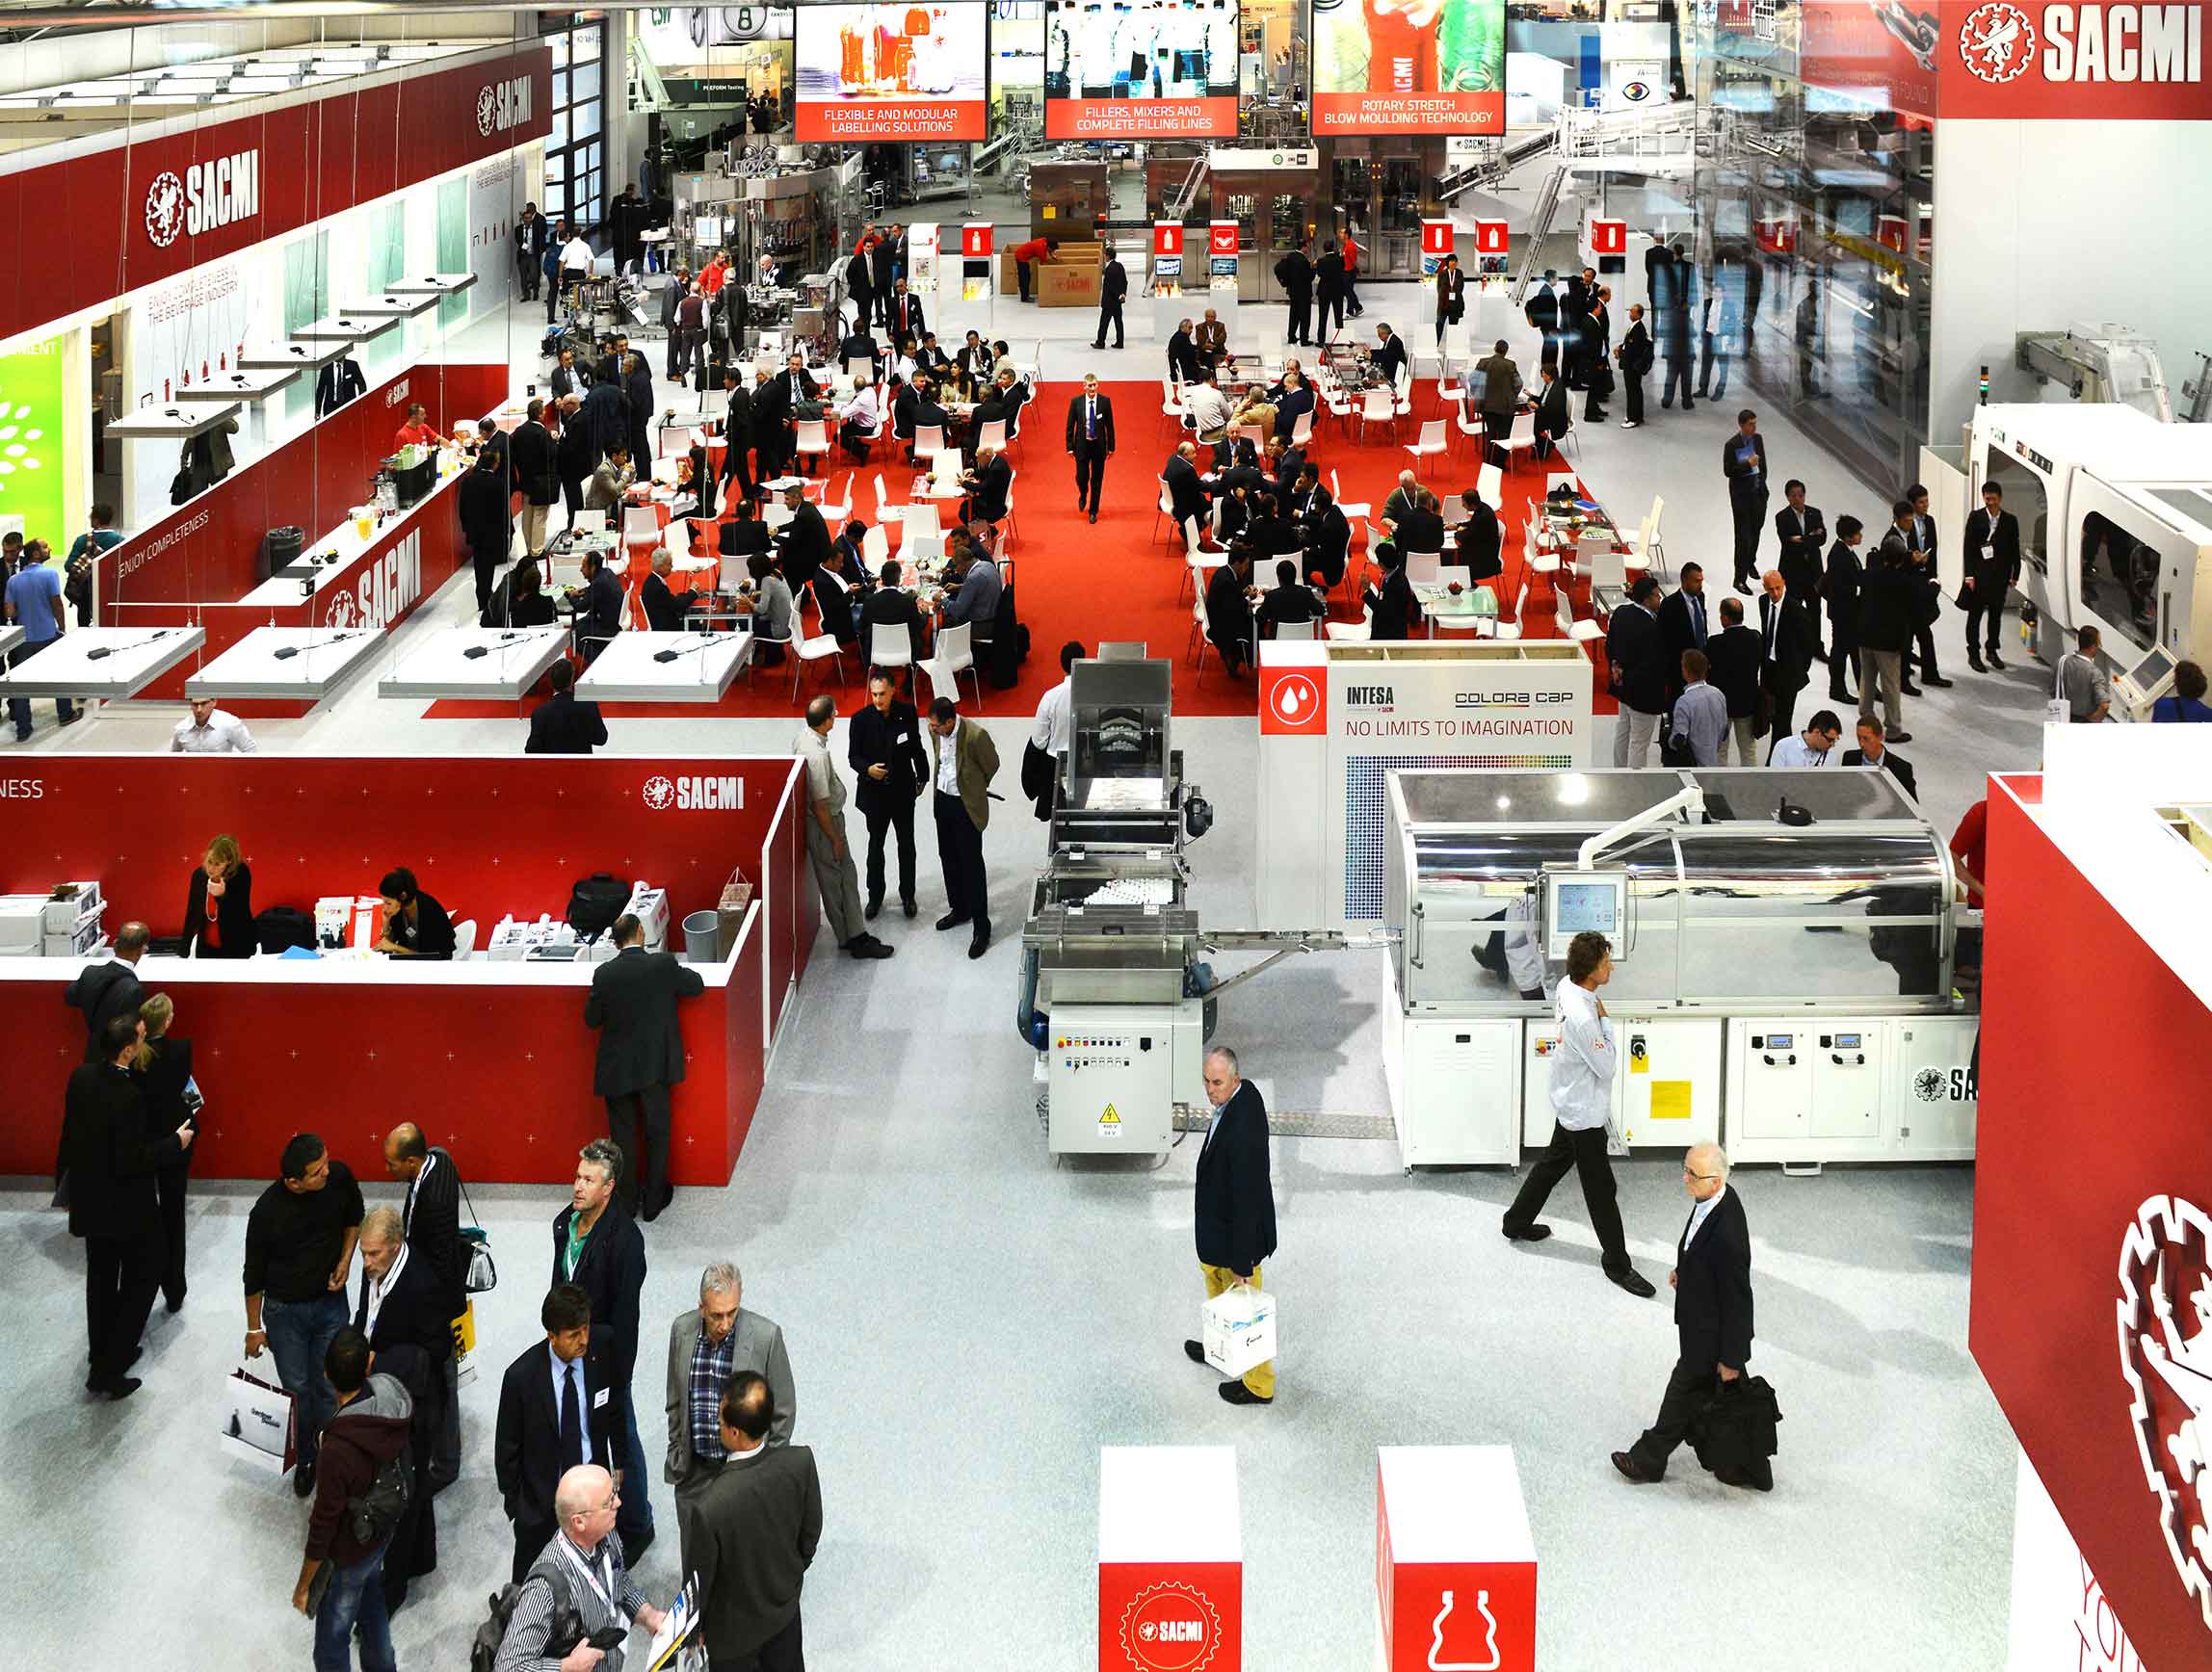 Made-in-Sacmi solutions take centre-stage